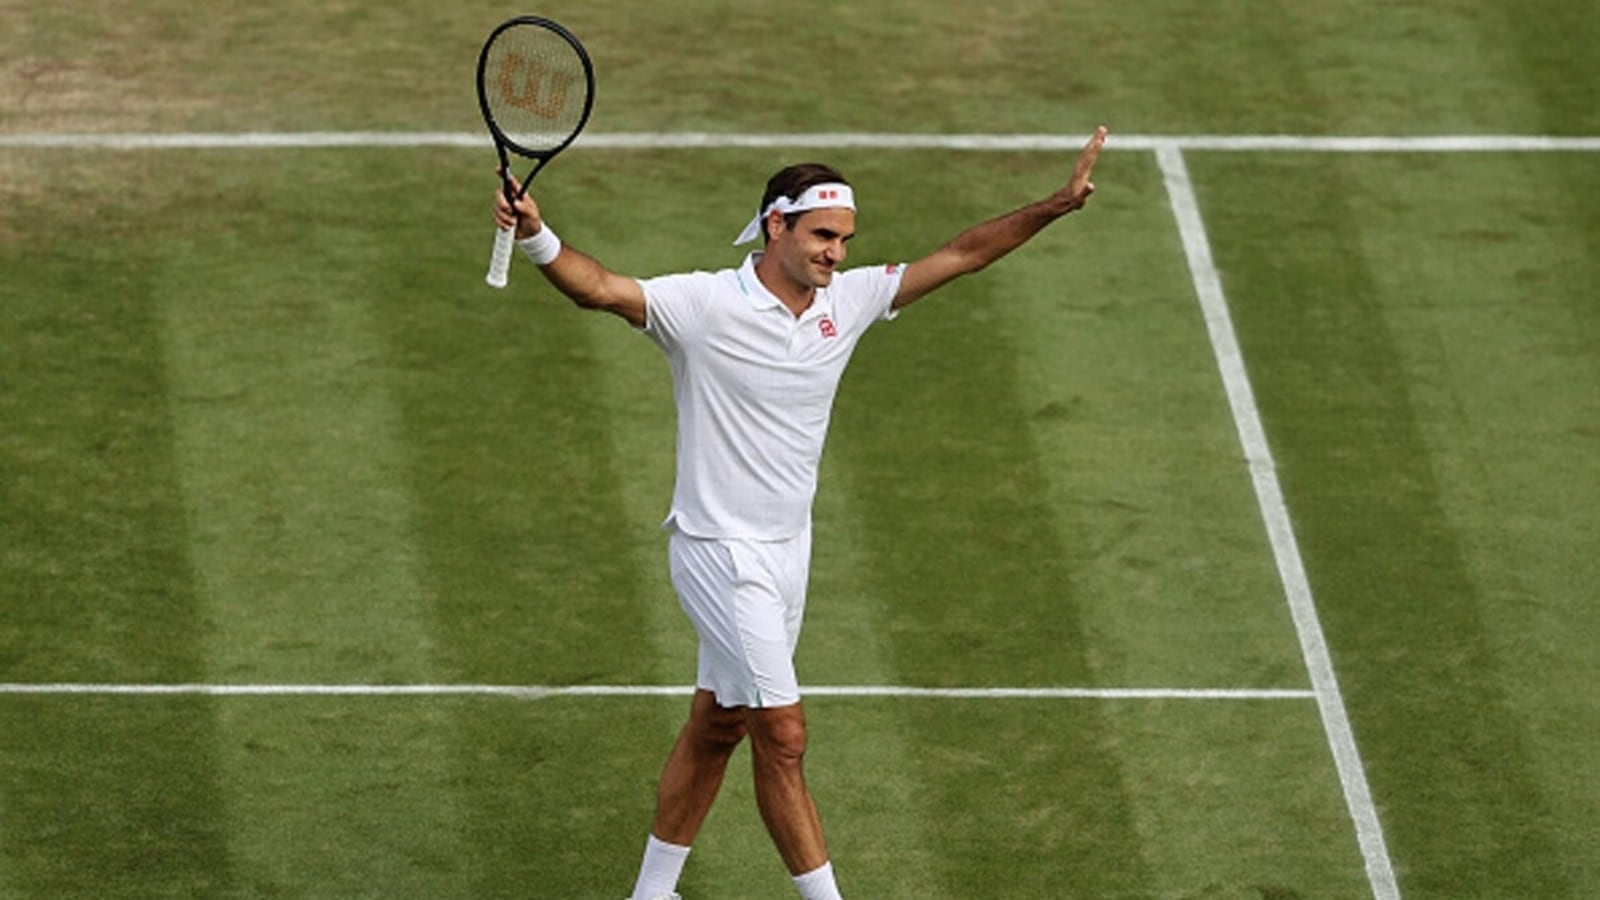 Roger Federer Announces Plans to Retire From Tennis - The New York Times